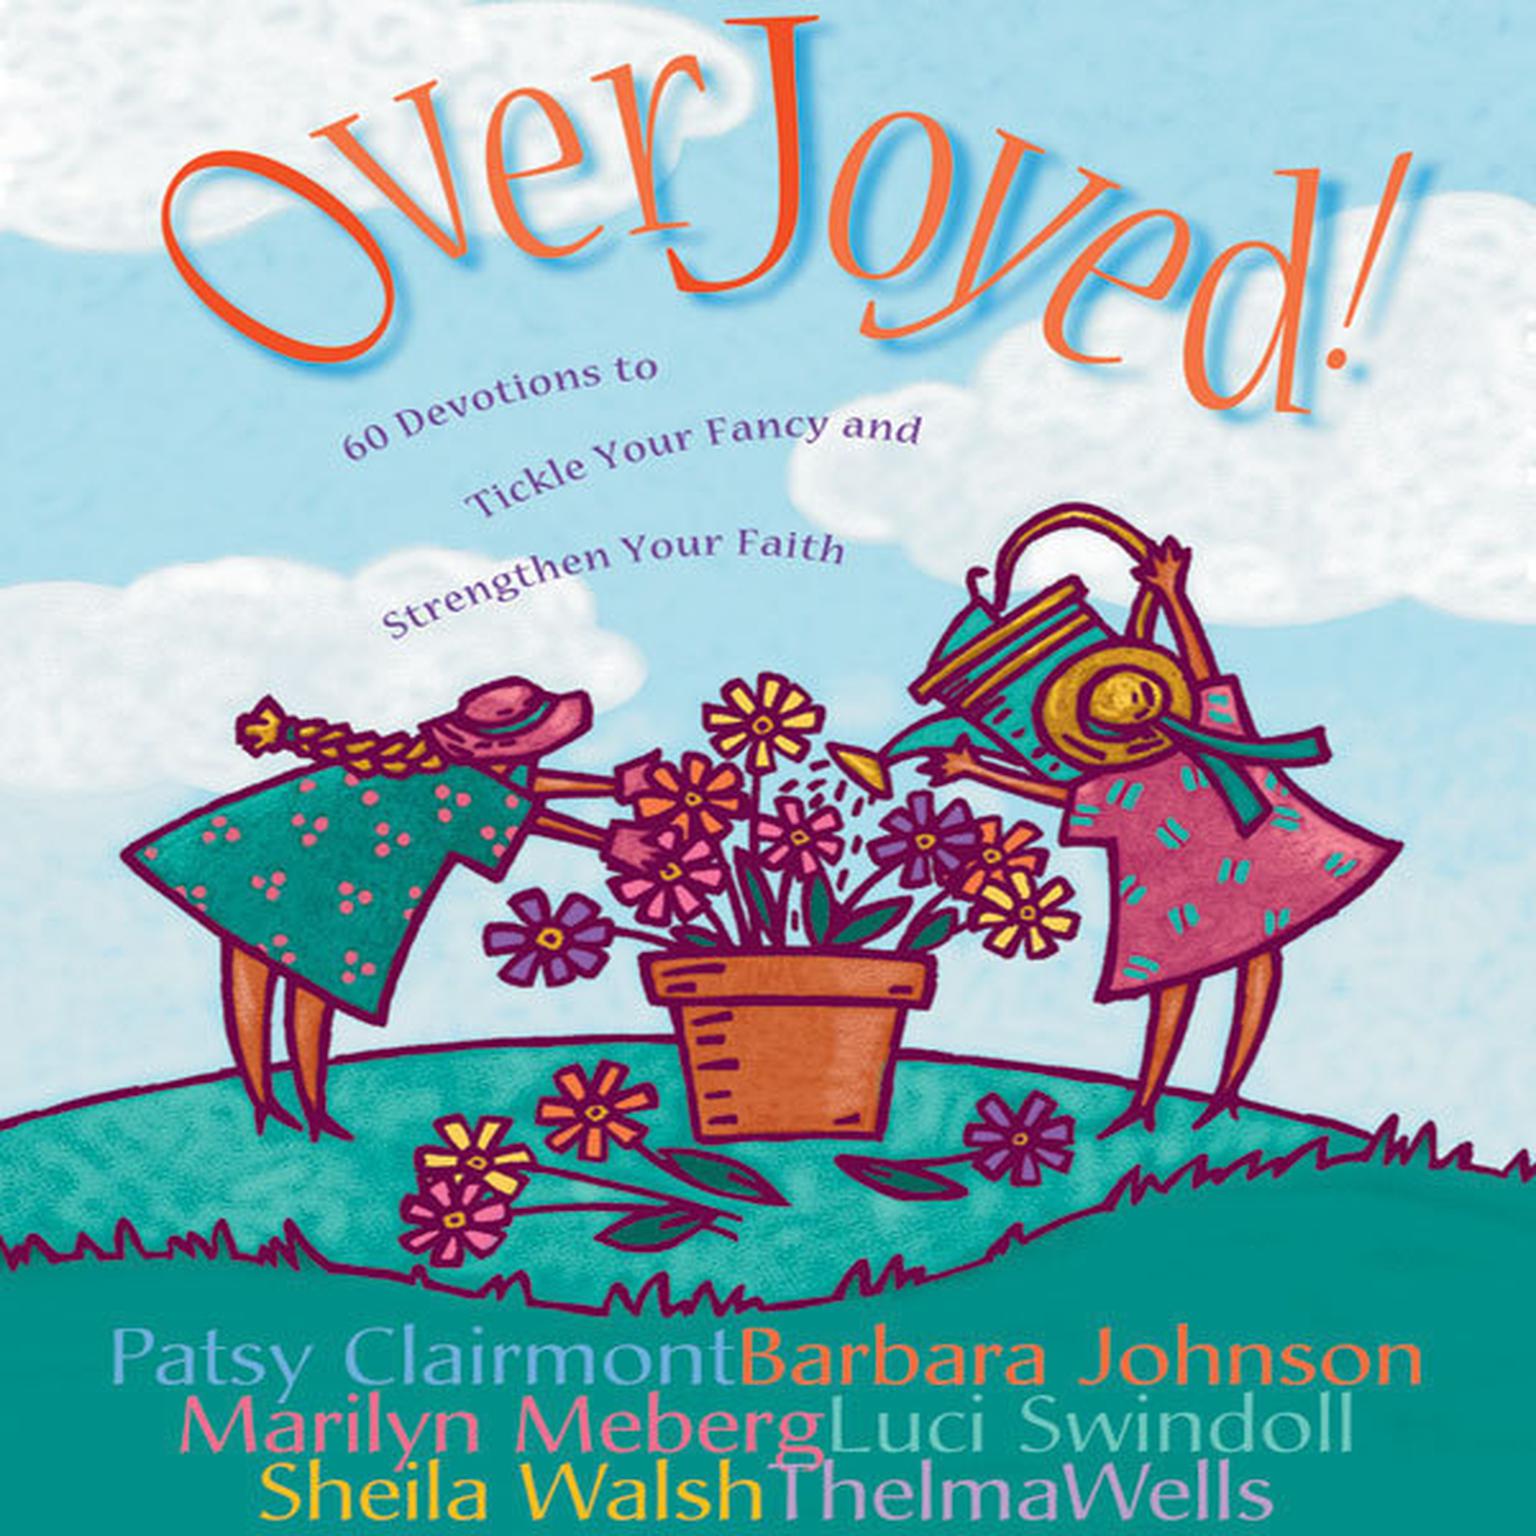 Overjoyed! (Abridged): Devotions to Tickle Your Fancy and Strengthen Your Faith Audiobook, by Patsy Clairmont